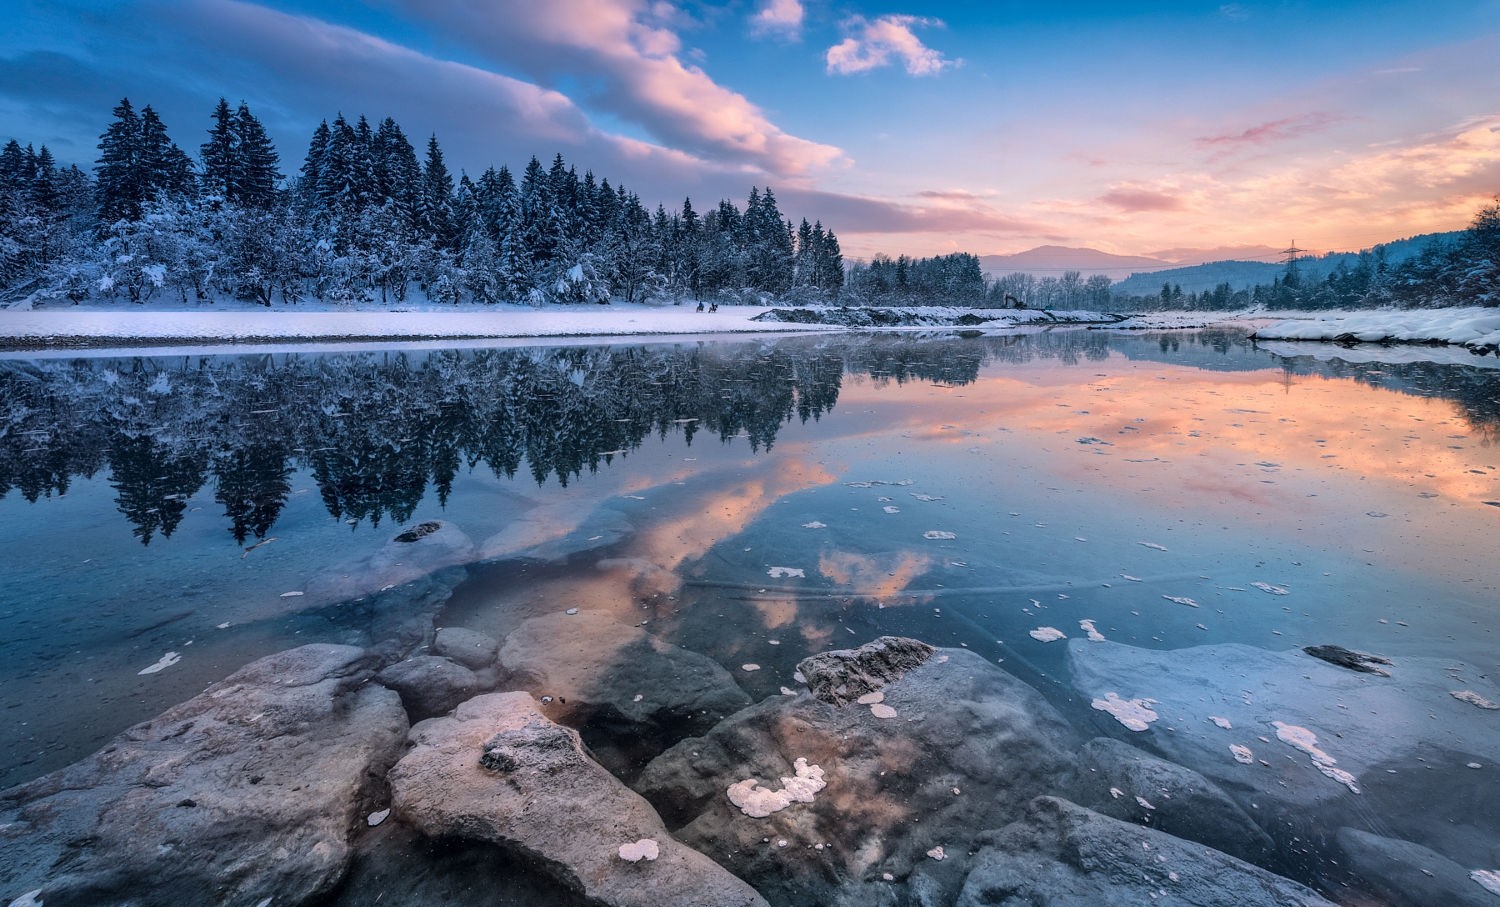 General 1500x907 nature photography landscape winter river sunset snow trees hills reflection clouds cold ice